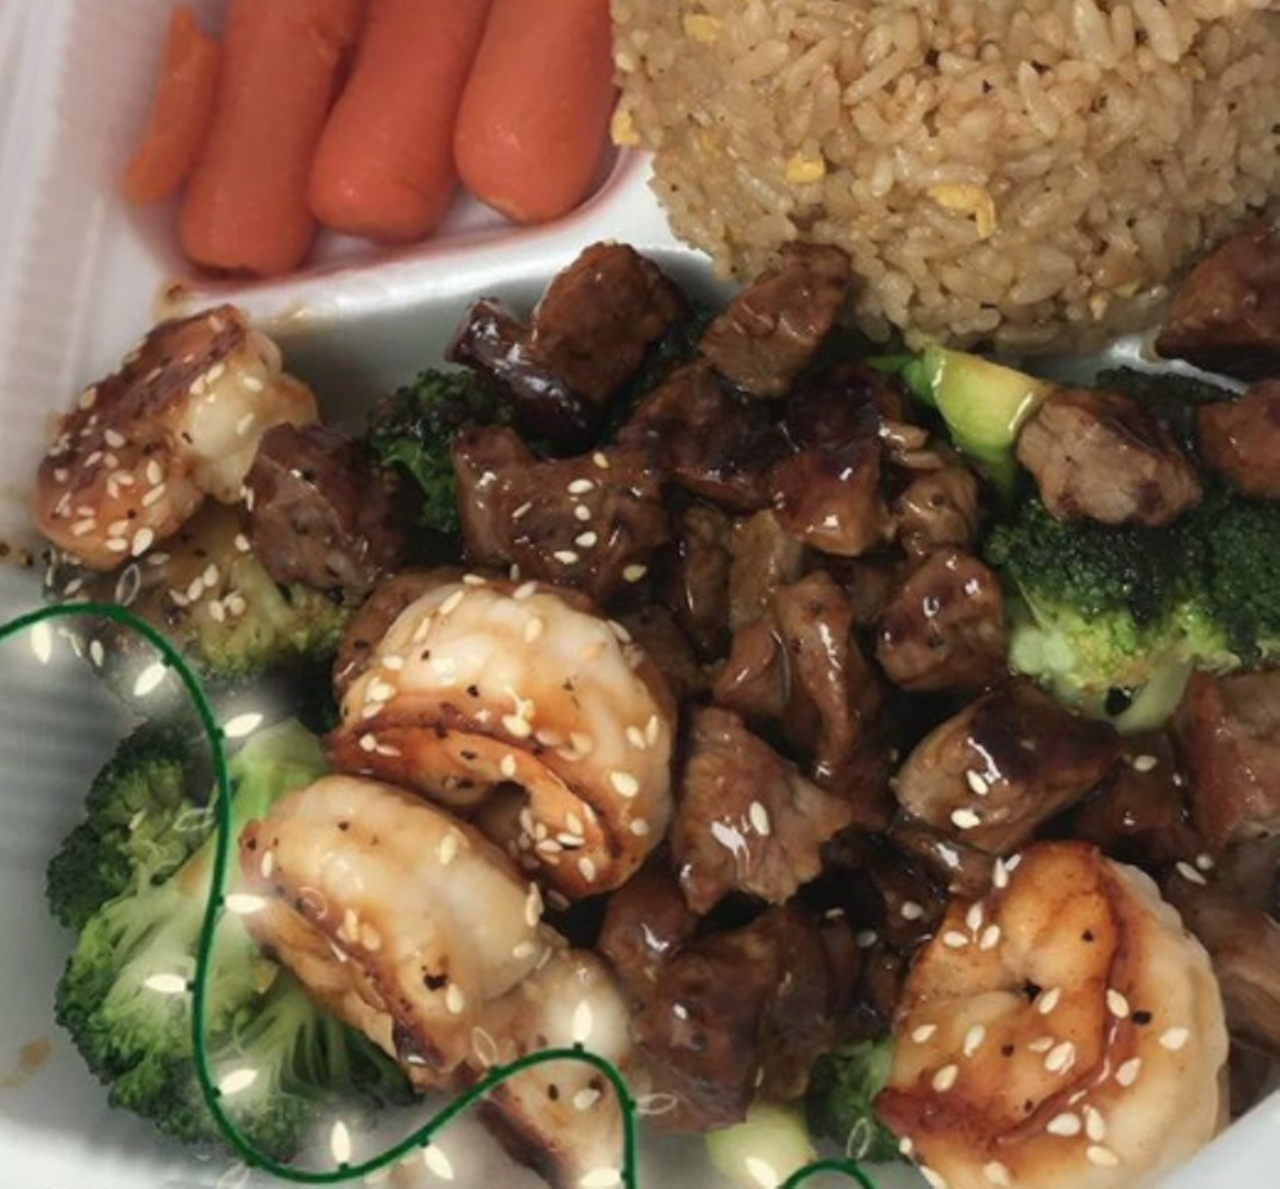 Ichiban Steak & Asian Fusion
8601 Huebner Road, (210) 641-1234
If you’ve never tasted the Asian interpretation of steak, you’re missing out. Venture out to Ichiban to try the Steak Yaki Saba Noodle or the steak fried rice.
Photo via Instagram / _a_rayofsunshine_